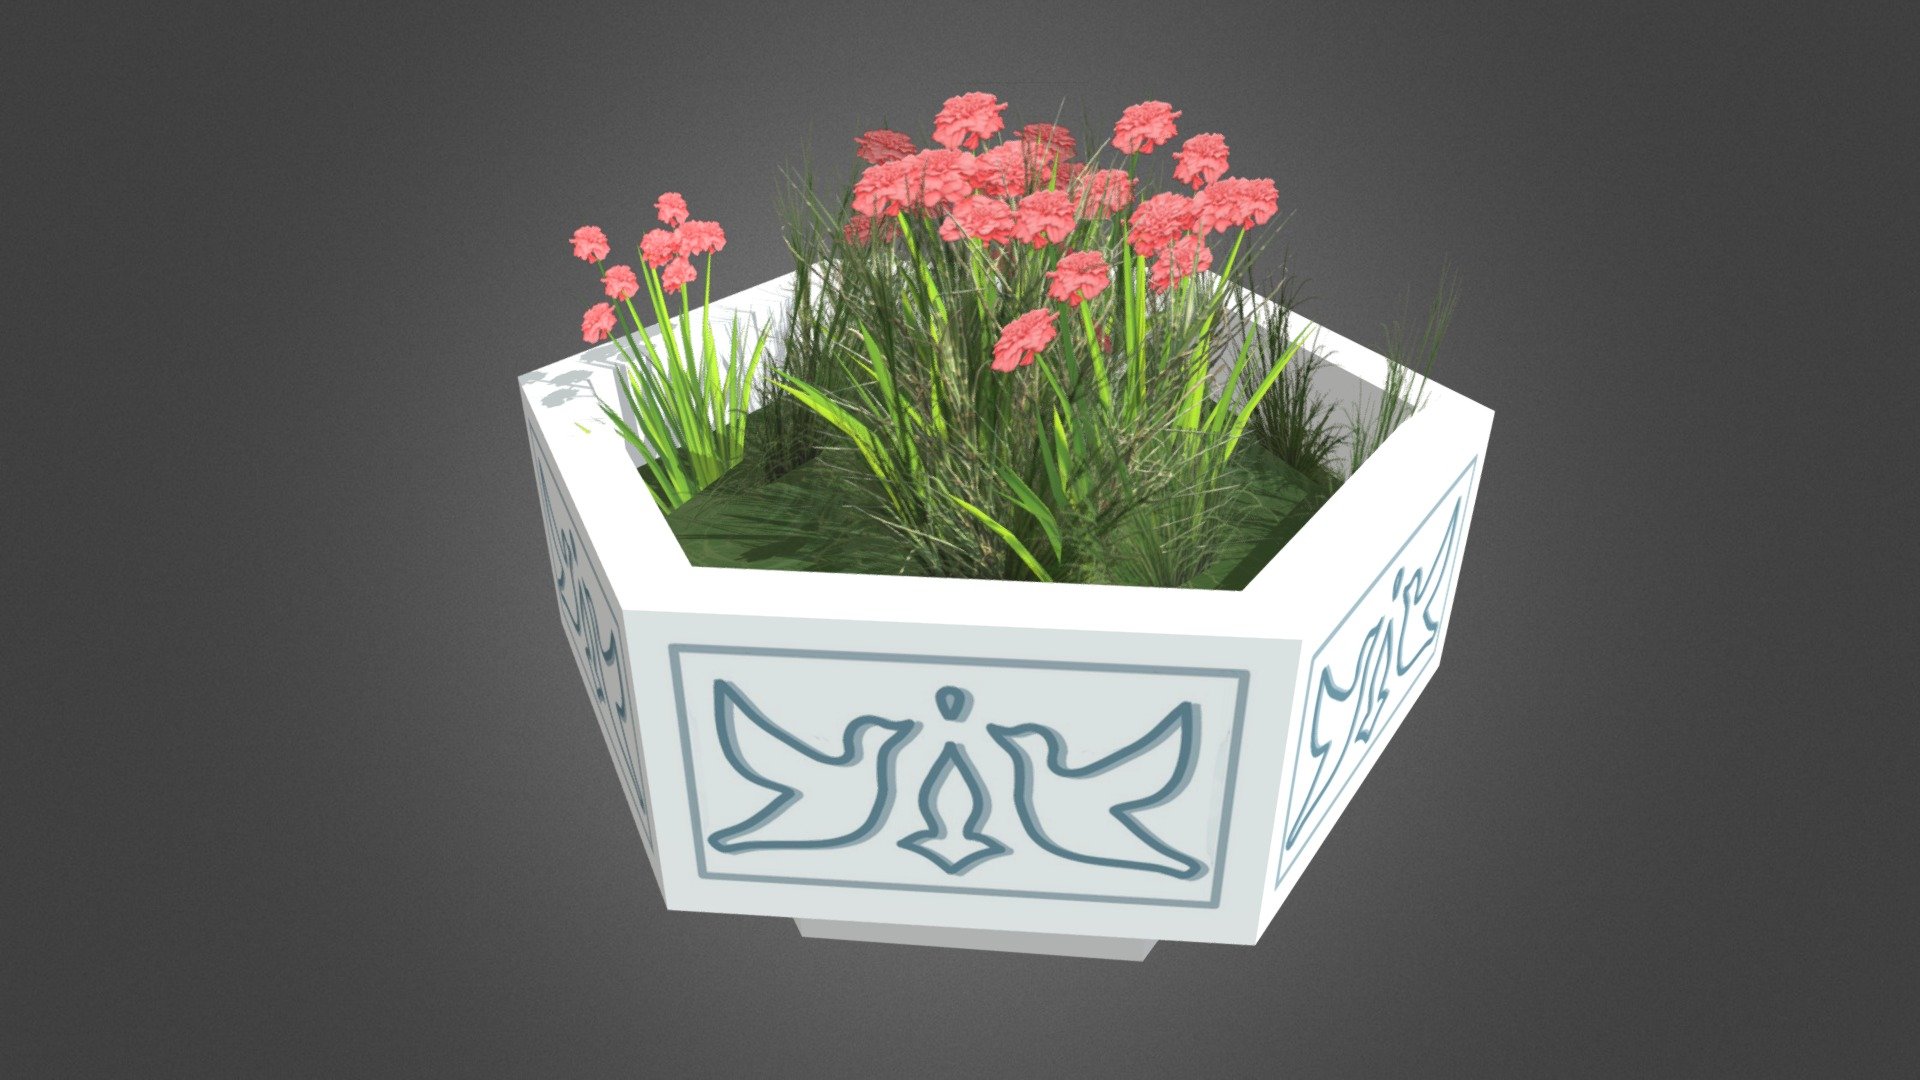 Pretty simple kashpo with flowers. Can be used as decor for pavements in cities.
Made by @yellika optimized by @Moora and me.  Part of our Forest Riders driving simualtor game 3d model